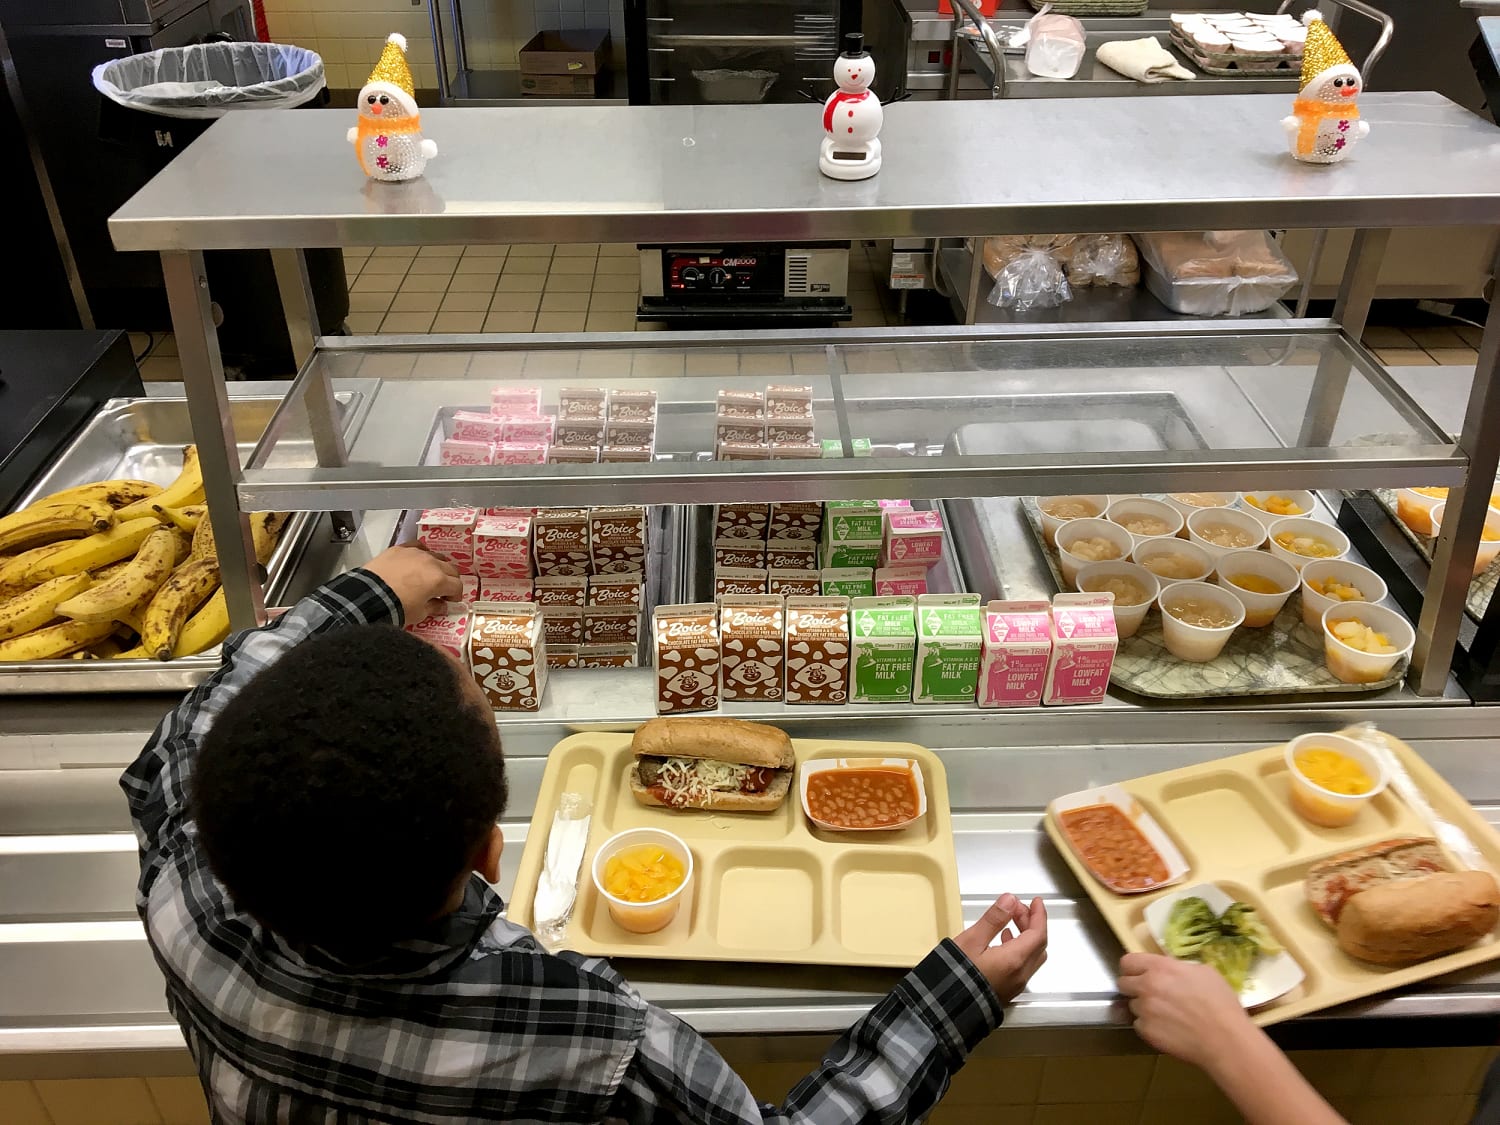 Trump plan failed to note that it could jeopardize free school lunches for 500,000 children, Democrats say